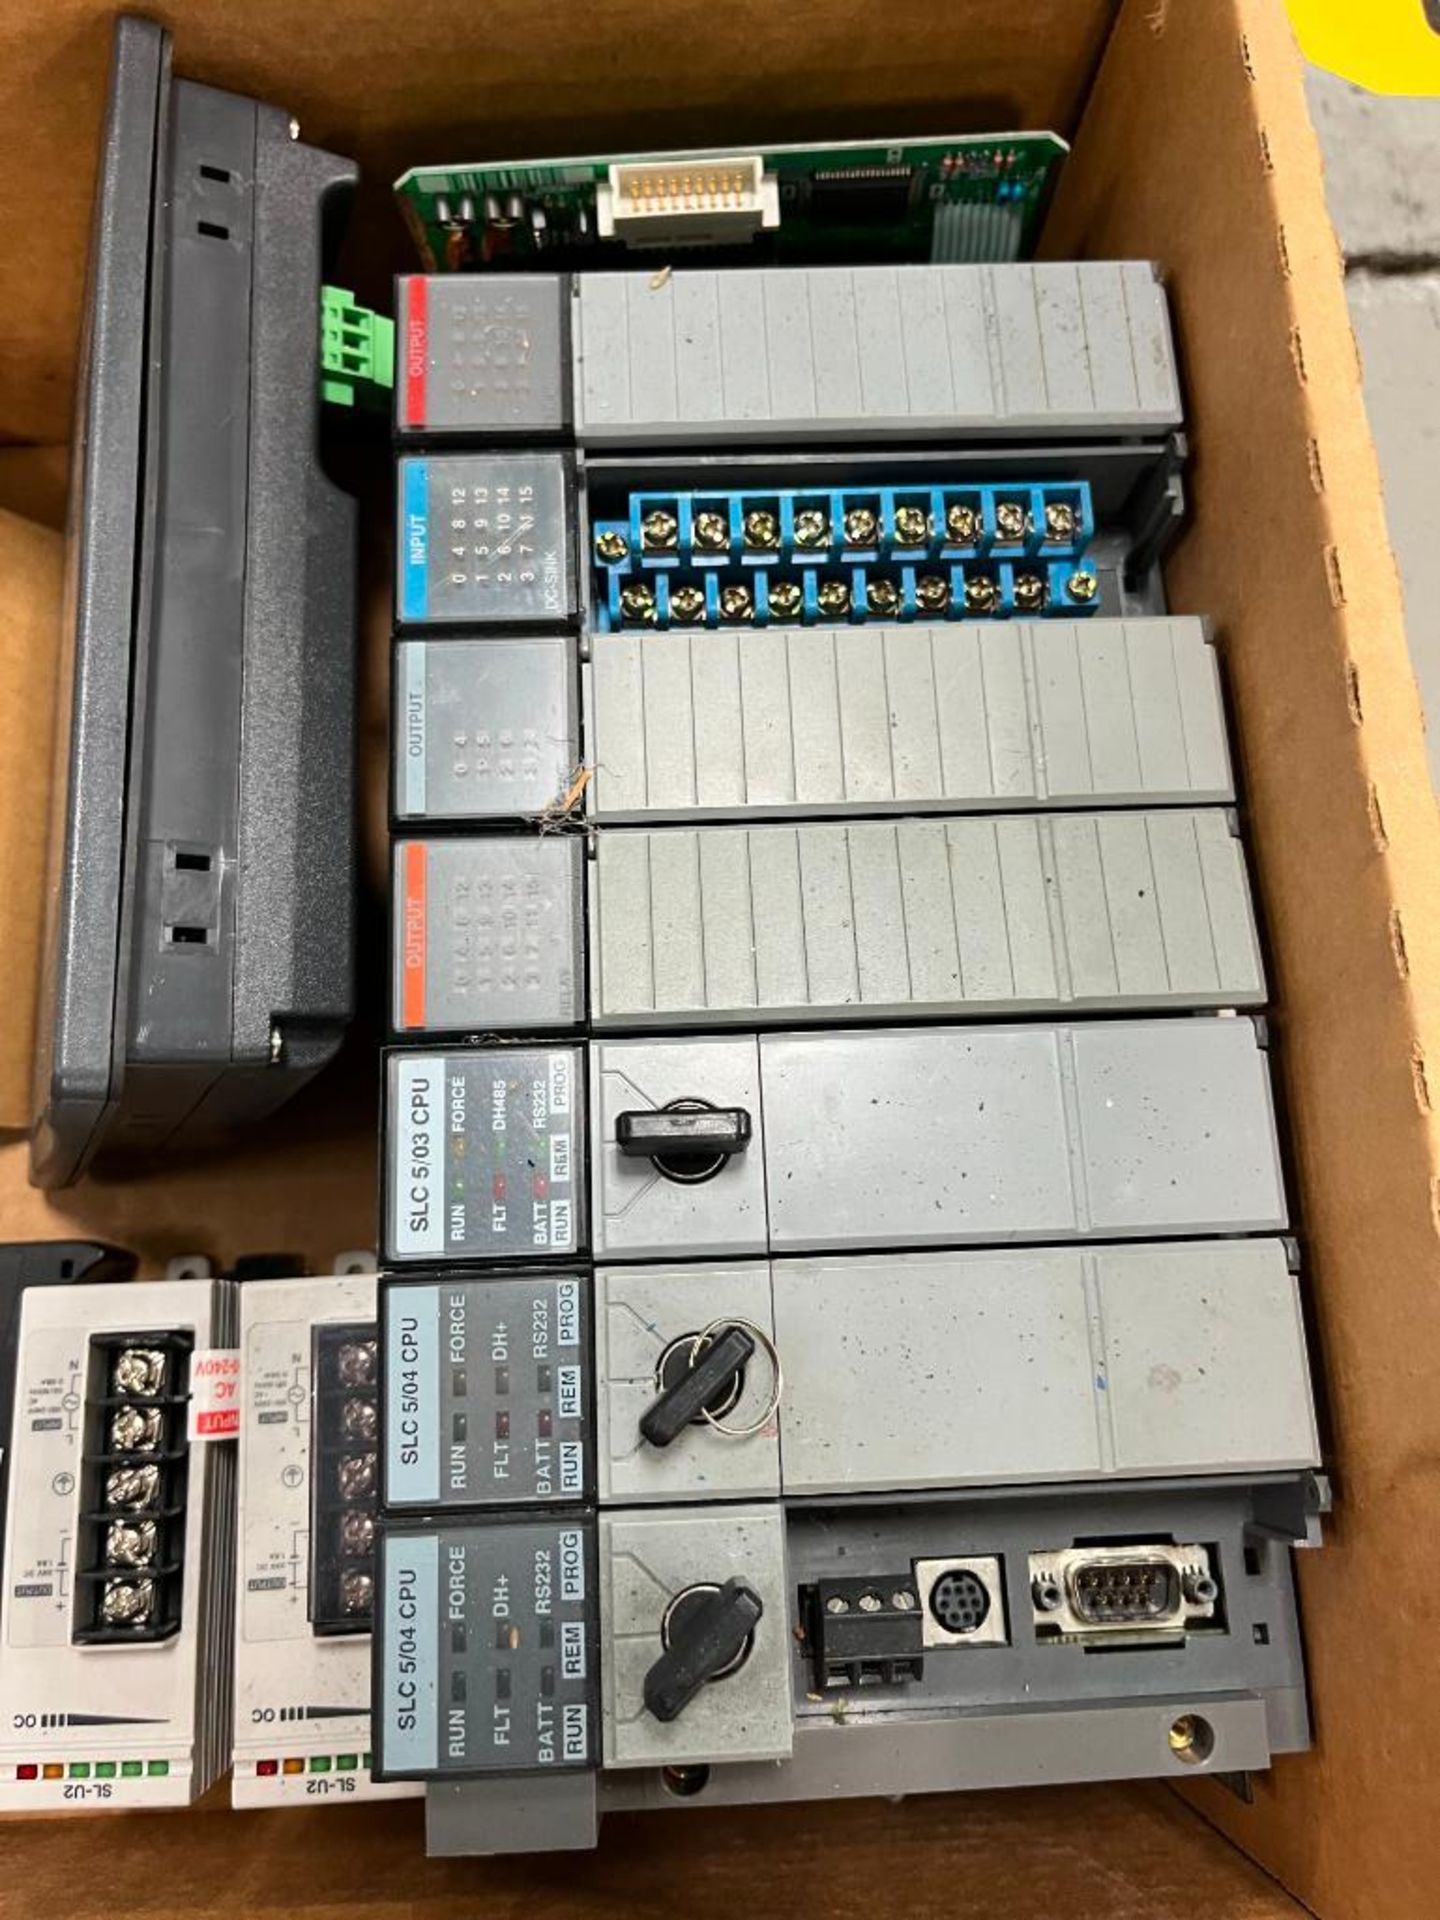 Pallet of AB Co Trols & Switches - Powerflex Units, PanelViews, AC Relays, Circuit Control Boards, P - Image 17 of 18